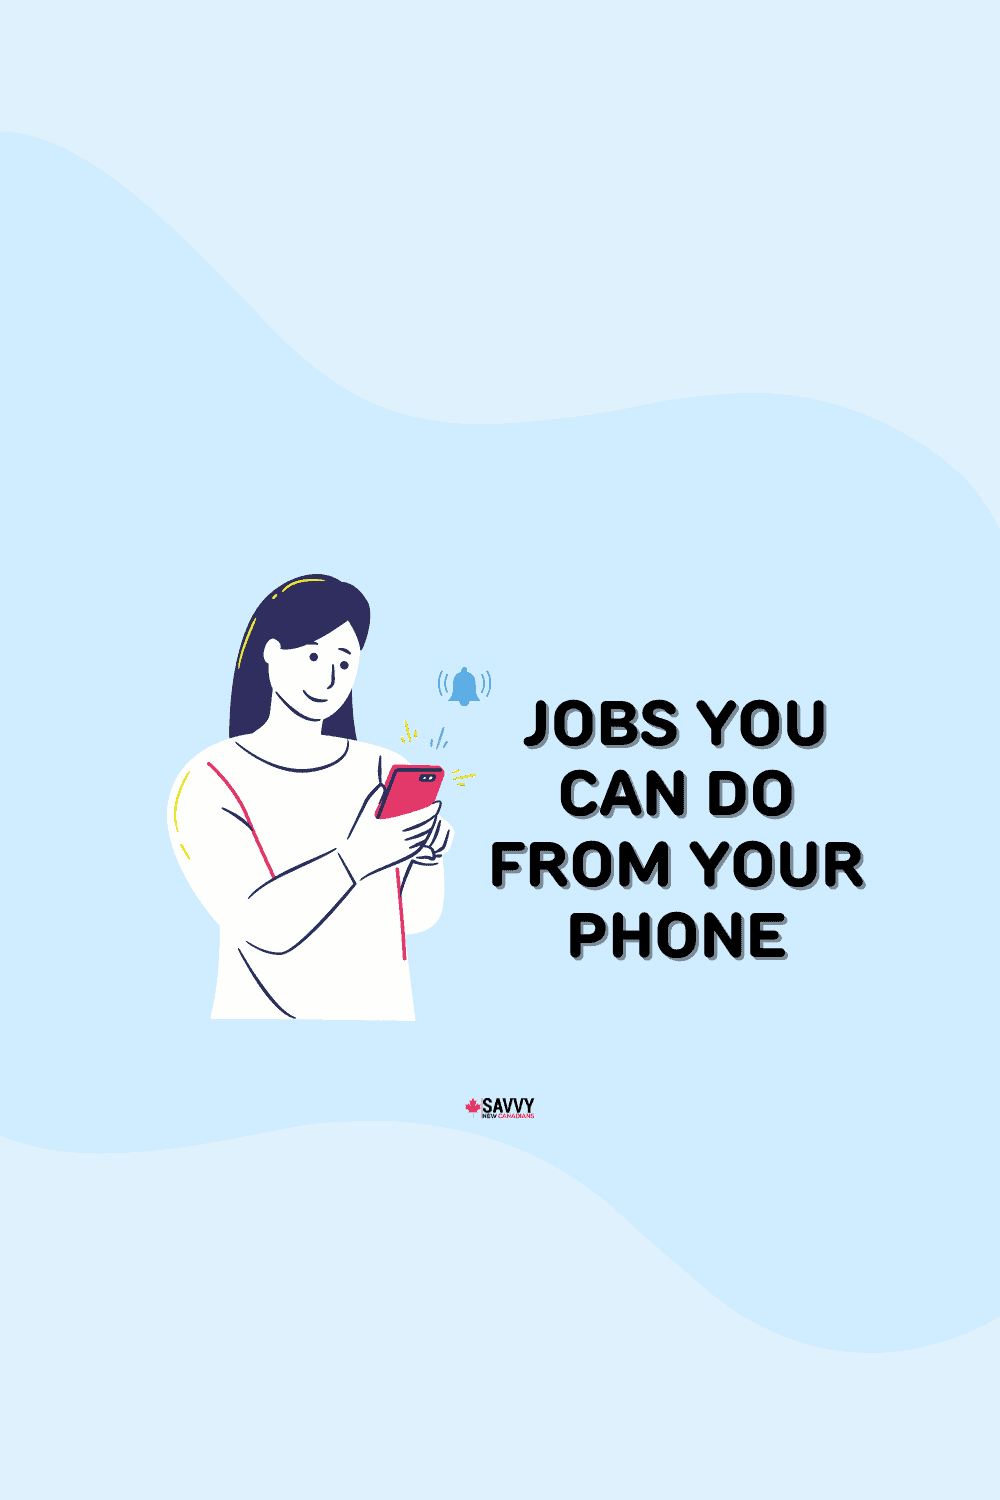 11 Legit Jobs You Can Do From Your Phone in 2022